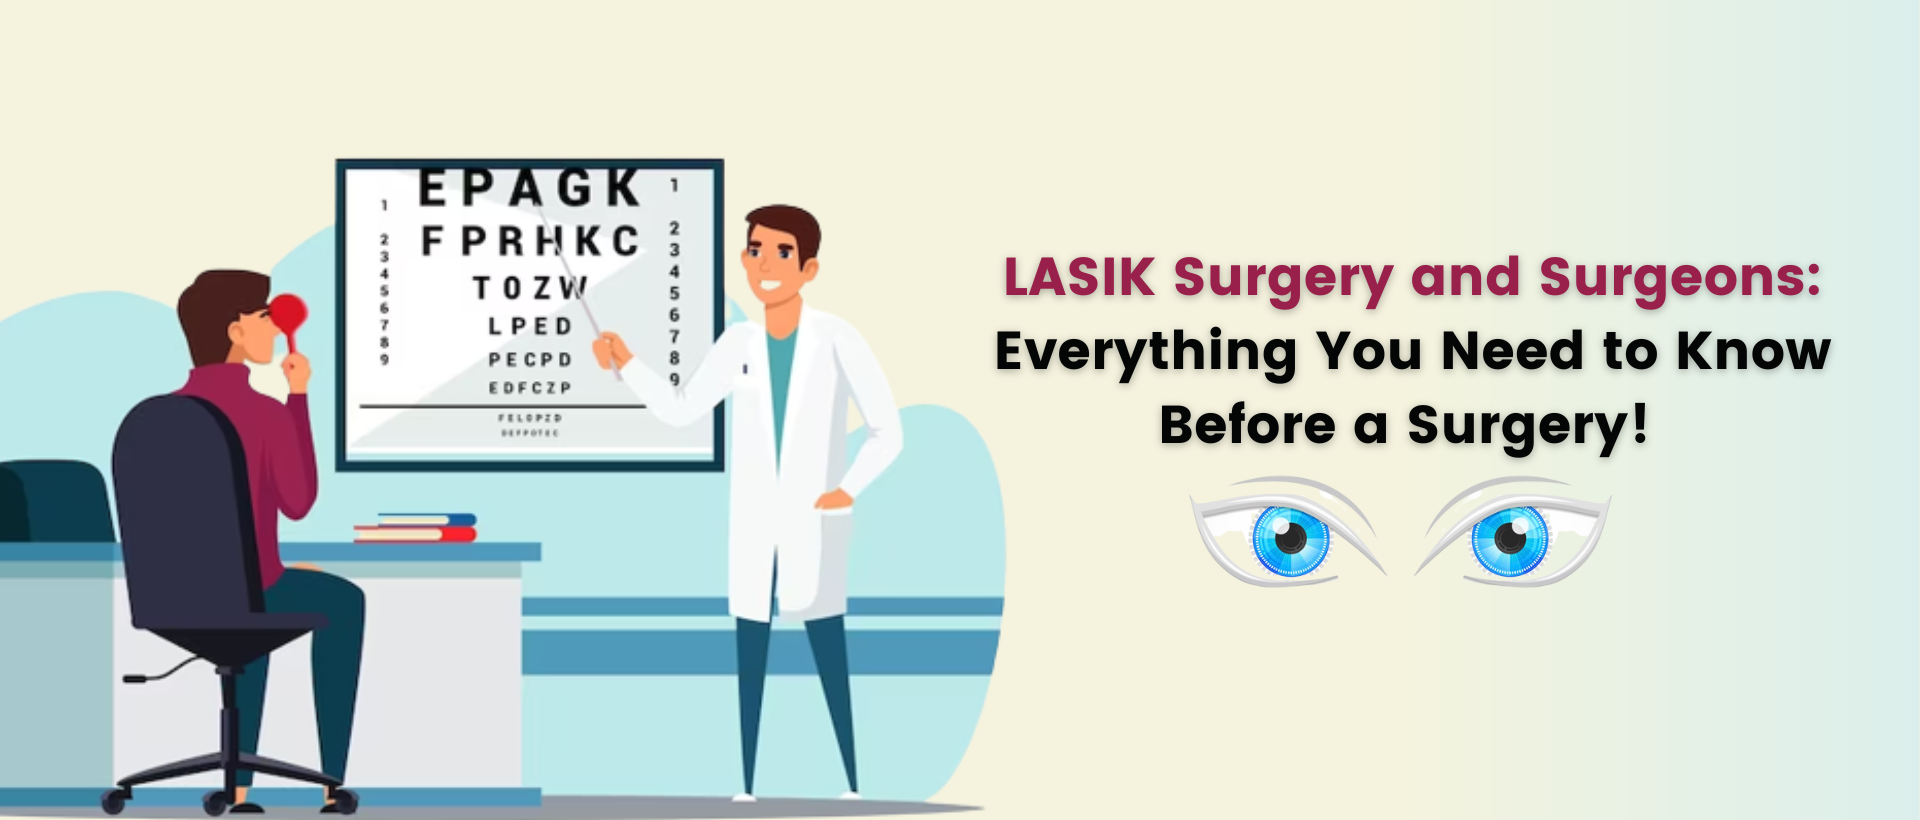 Lasik surgery and surgeons: everything you need to know before a surgery! 